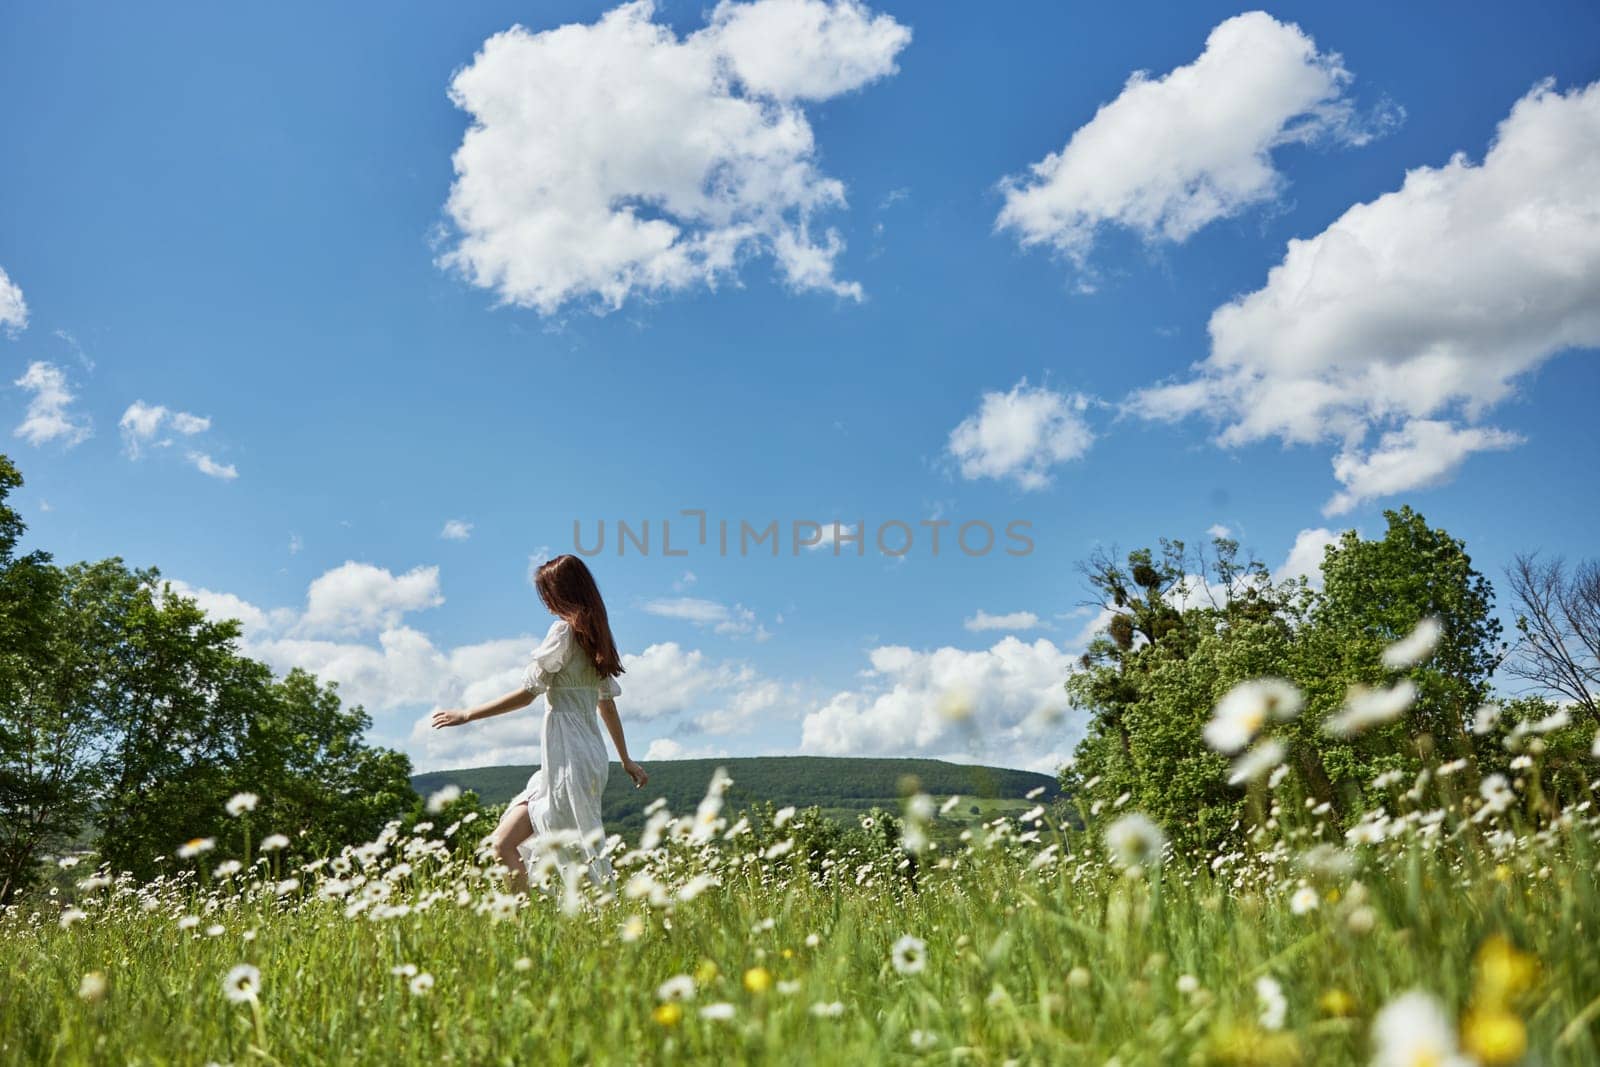 a woman in a light dress runs far across a chamomile field against a blue sky, enjoying harmony with nature by Vichizh